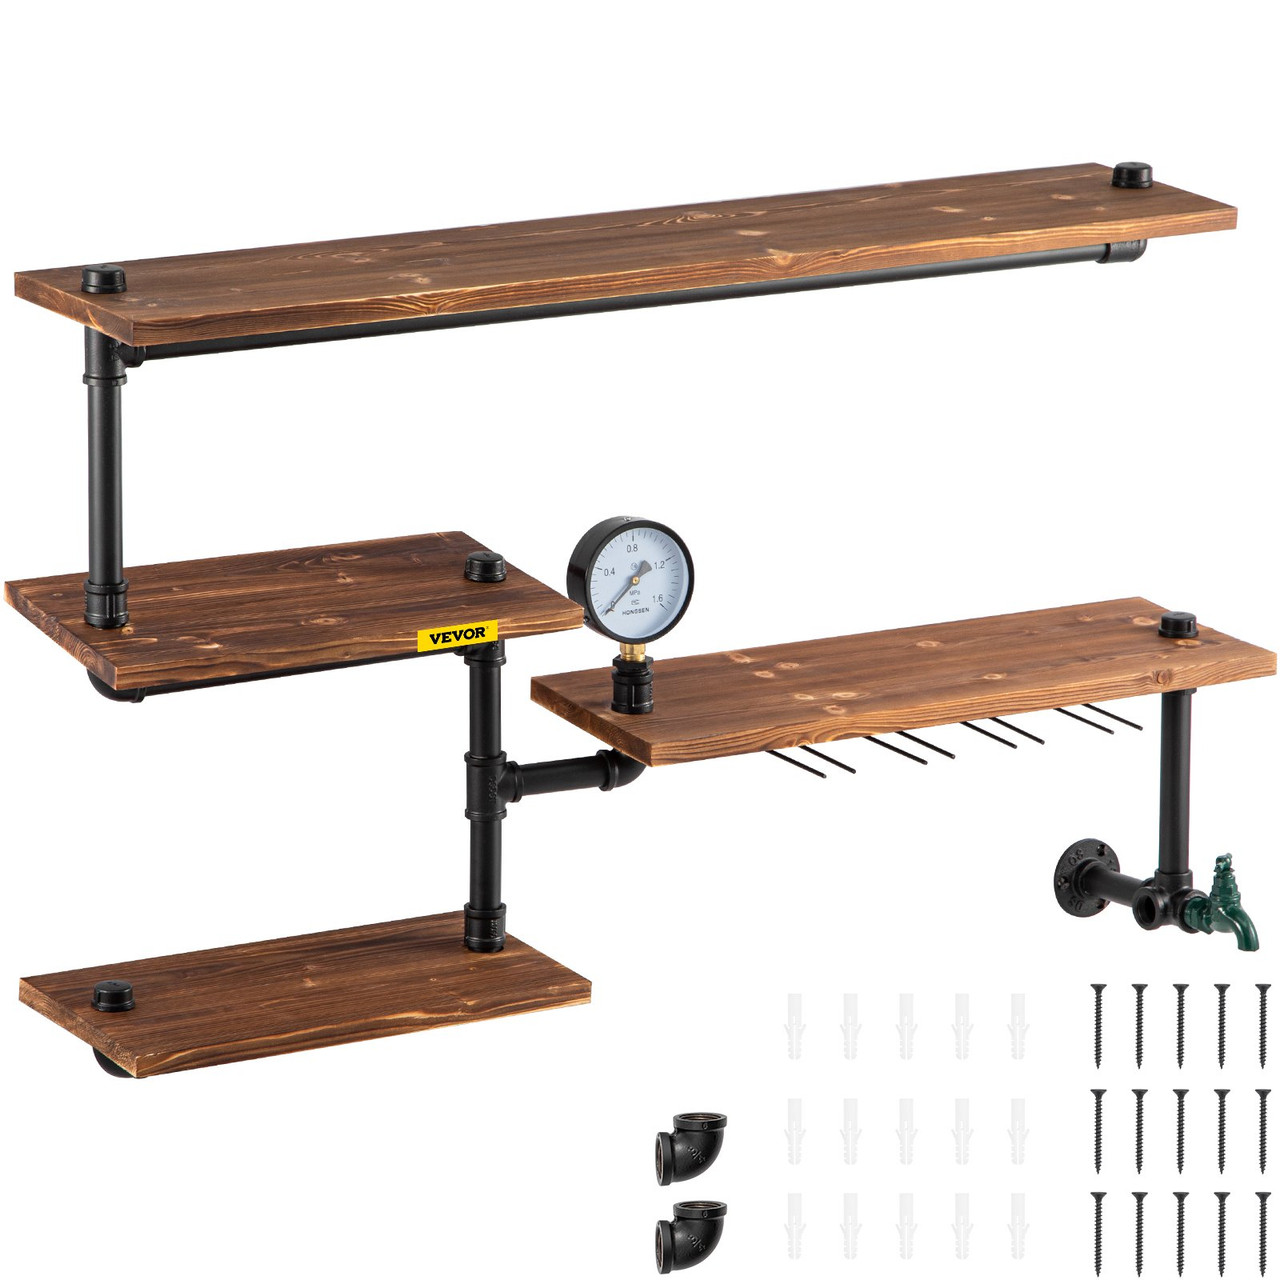 Iron Pipes Shelving, Industrial Steel Pipe Shelf w/ 4-Tier Wood Planks, Wall Mounted Modern Rustic Floating Shelves, DIY Storage Bracket for Bathroom, Bookshelf, Kitchen, and Home Decor